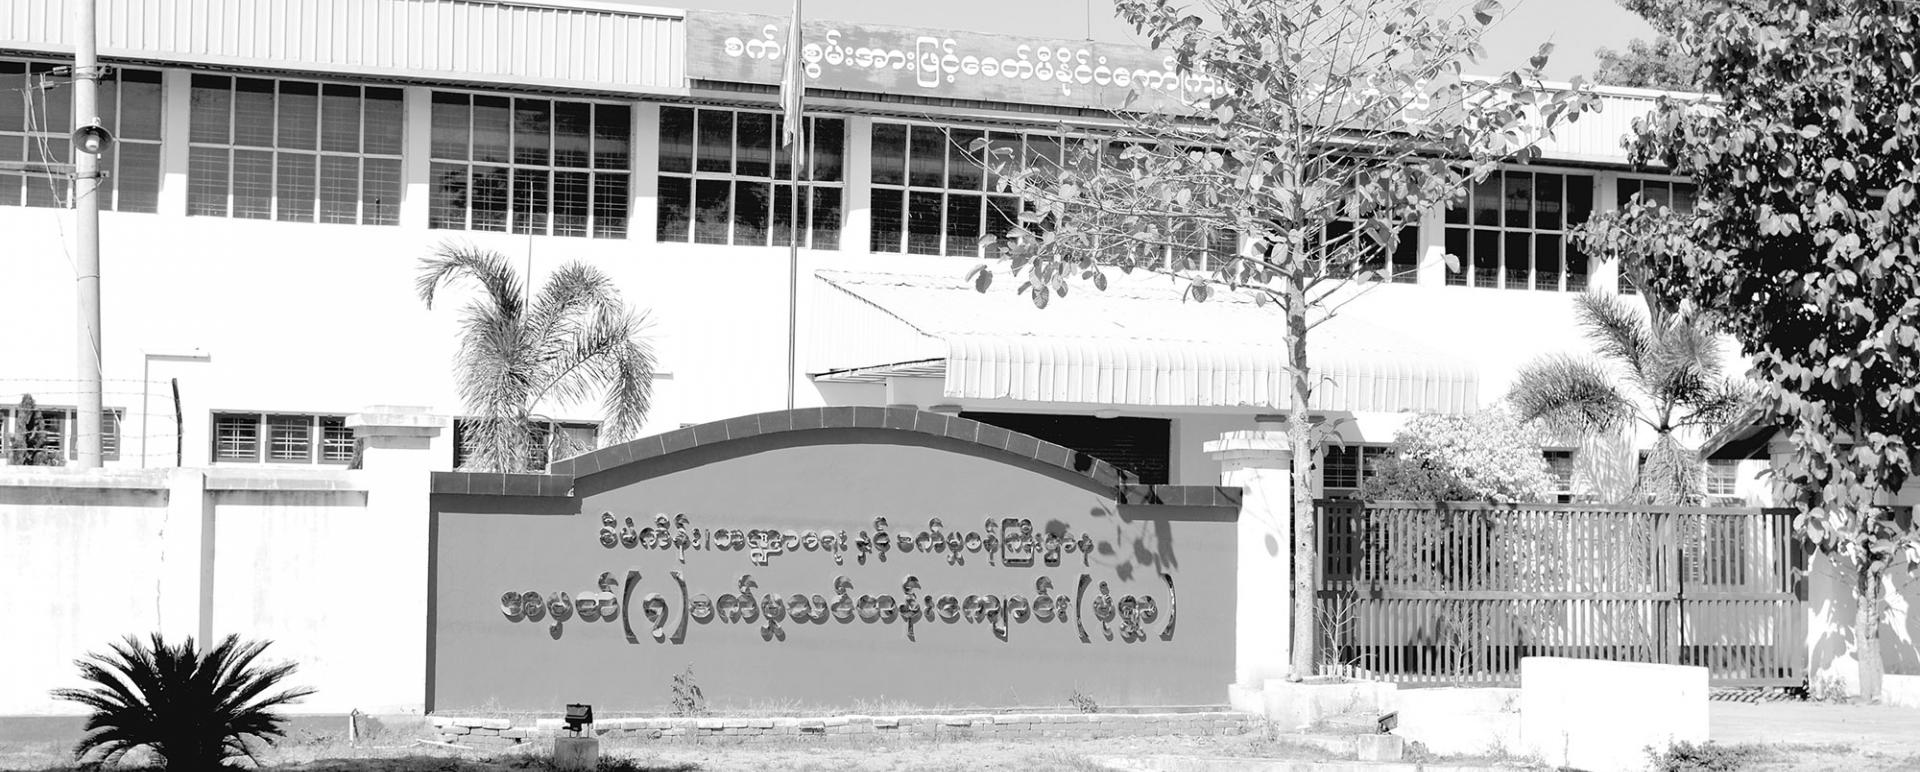 In collaboration with Indian Government, Myanmar government plans to open Technical High School (THS) in Monyawa Township, Sagaing Region 